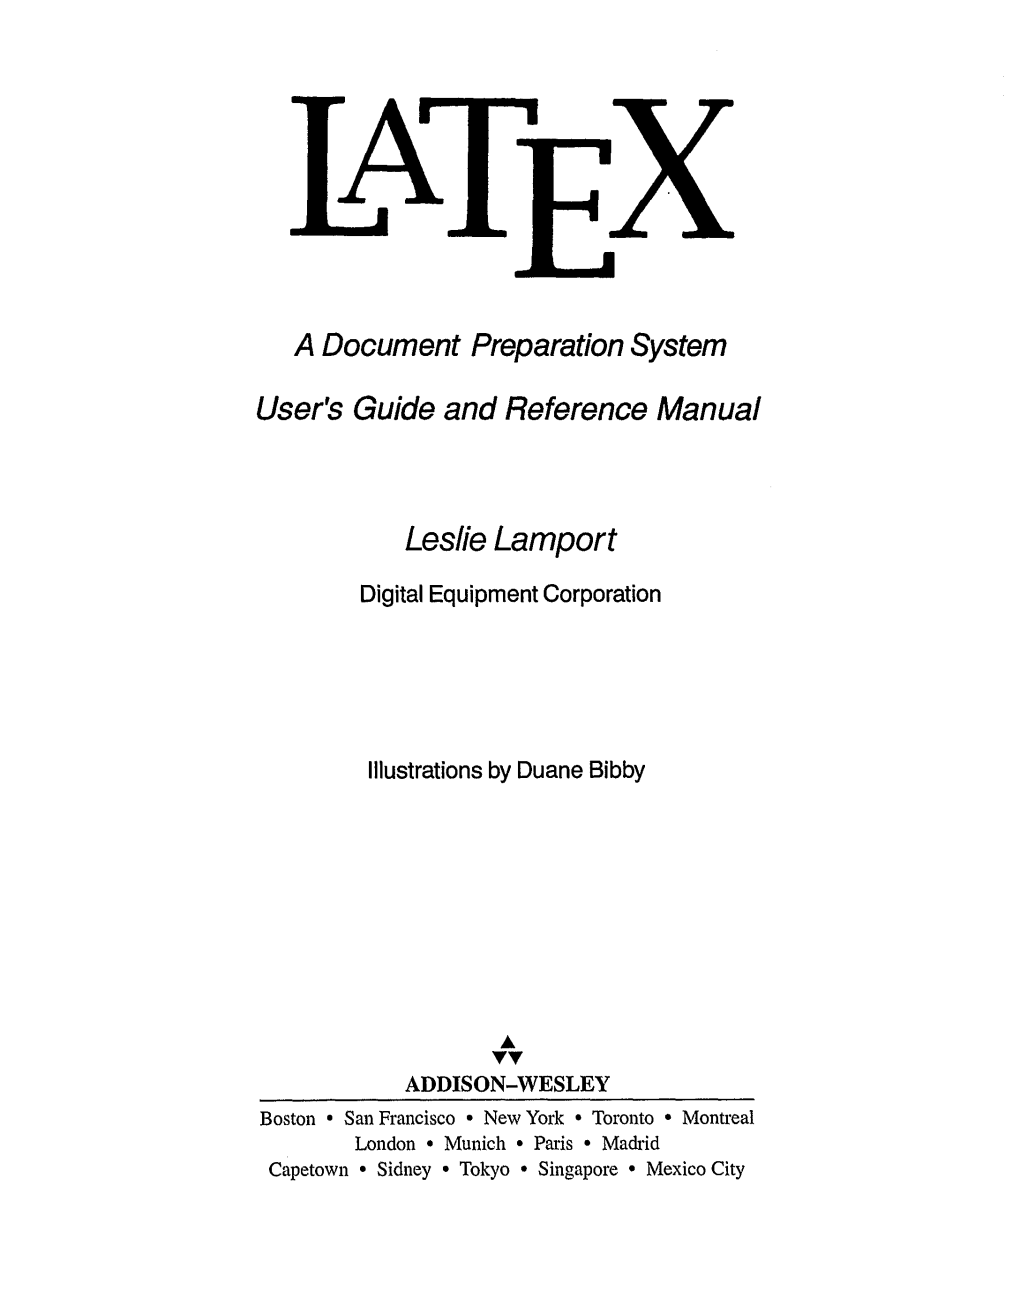 A Document Preparation System User's Guide and Reference